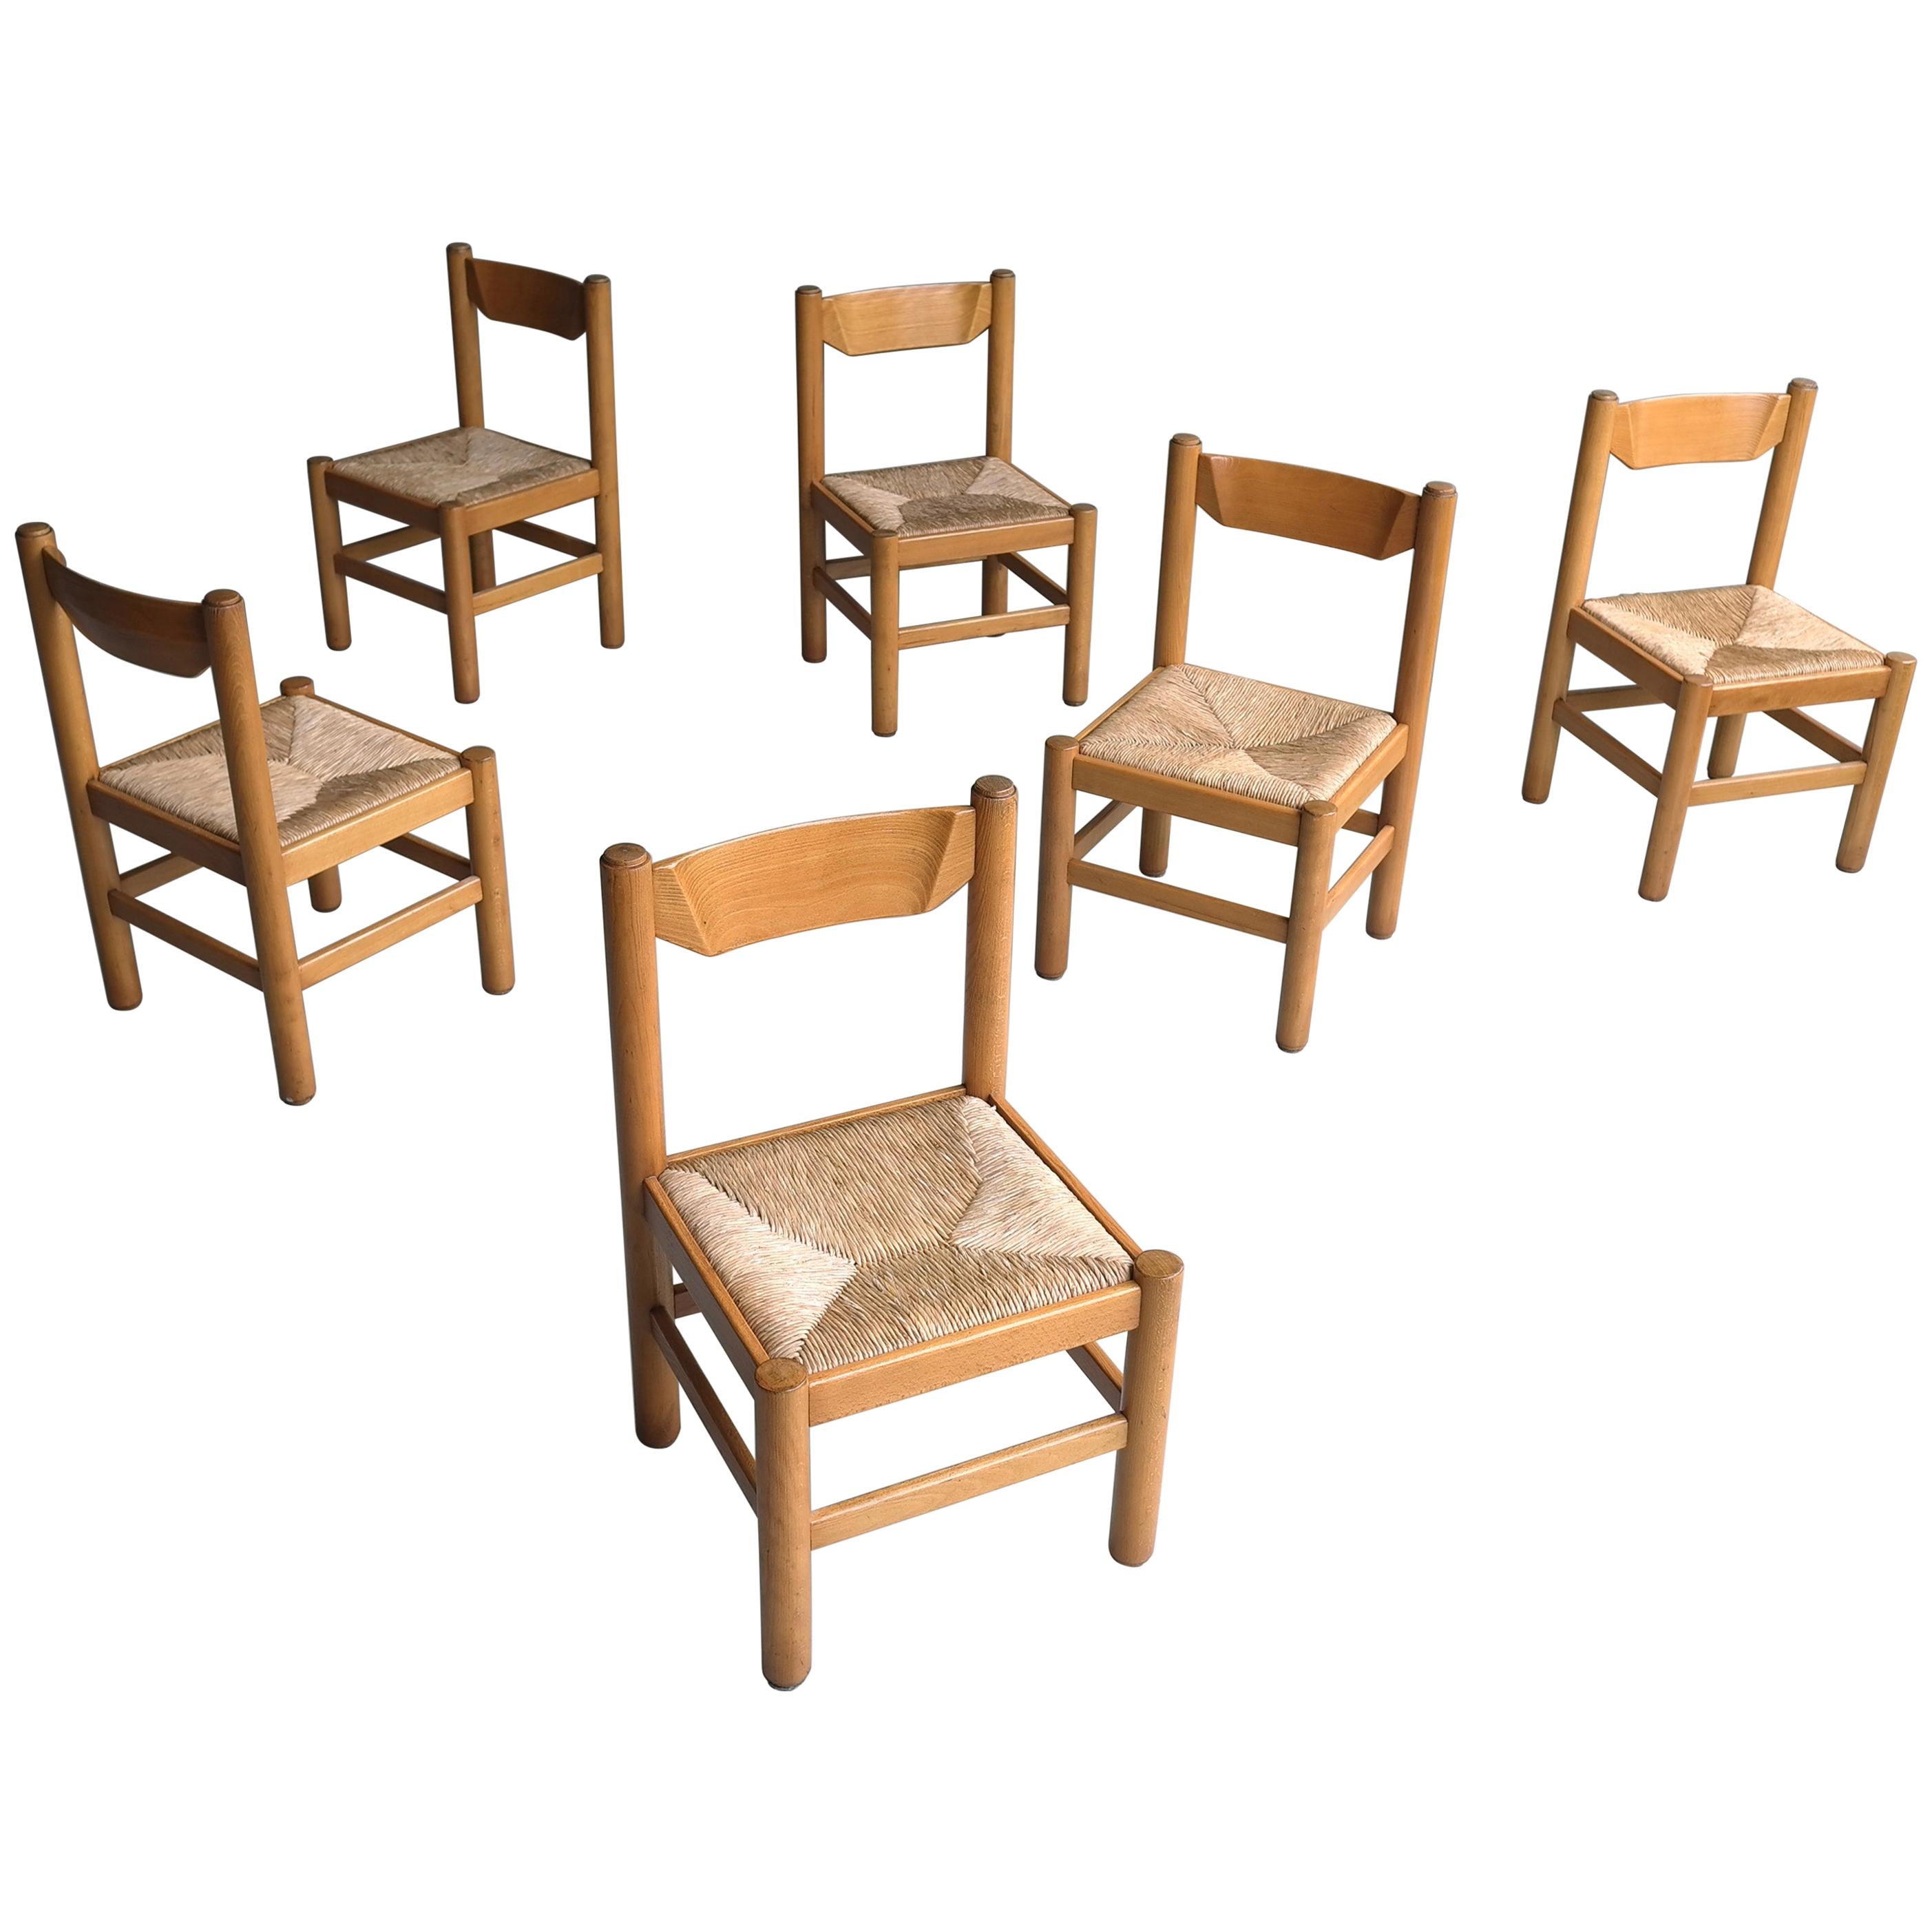 Set of Eight Wood and Rush Chairs in Style of Charlotte Perriand, France, 1960